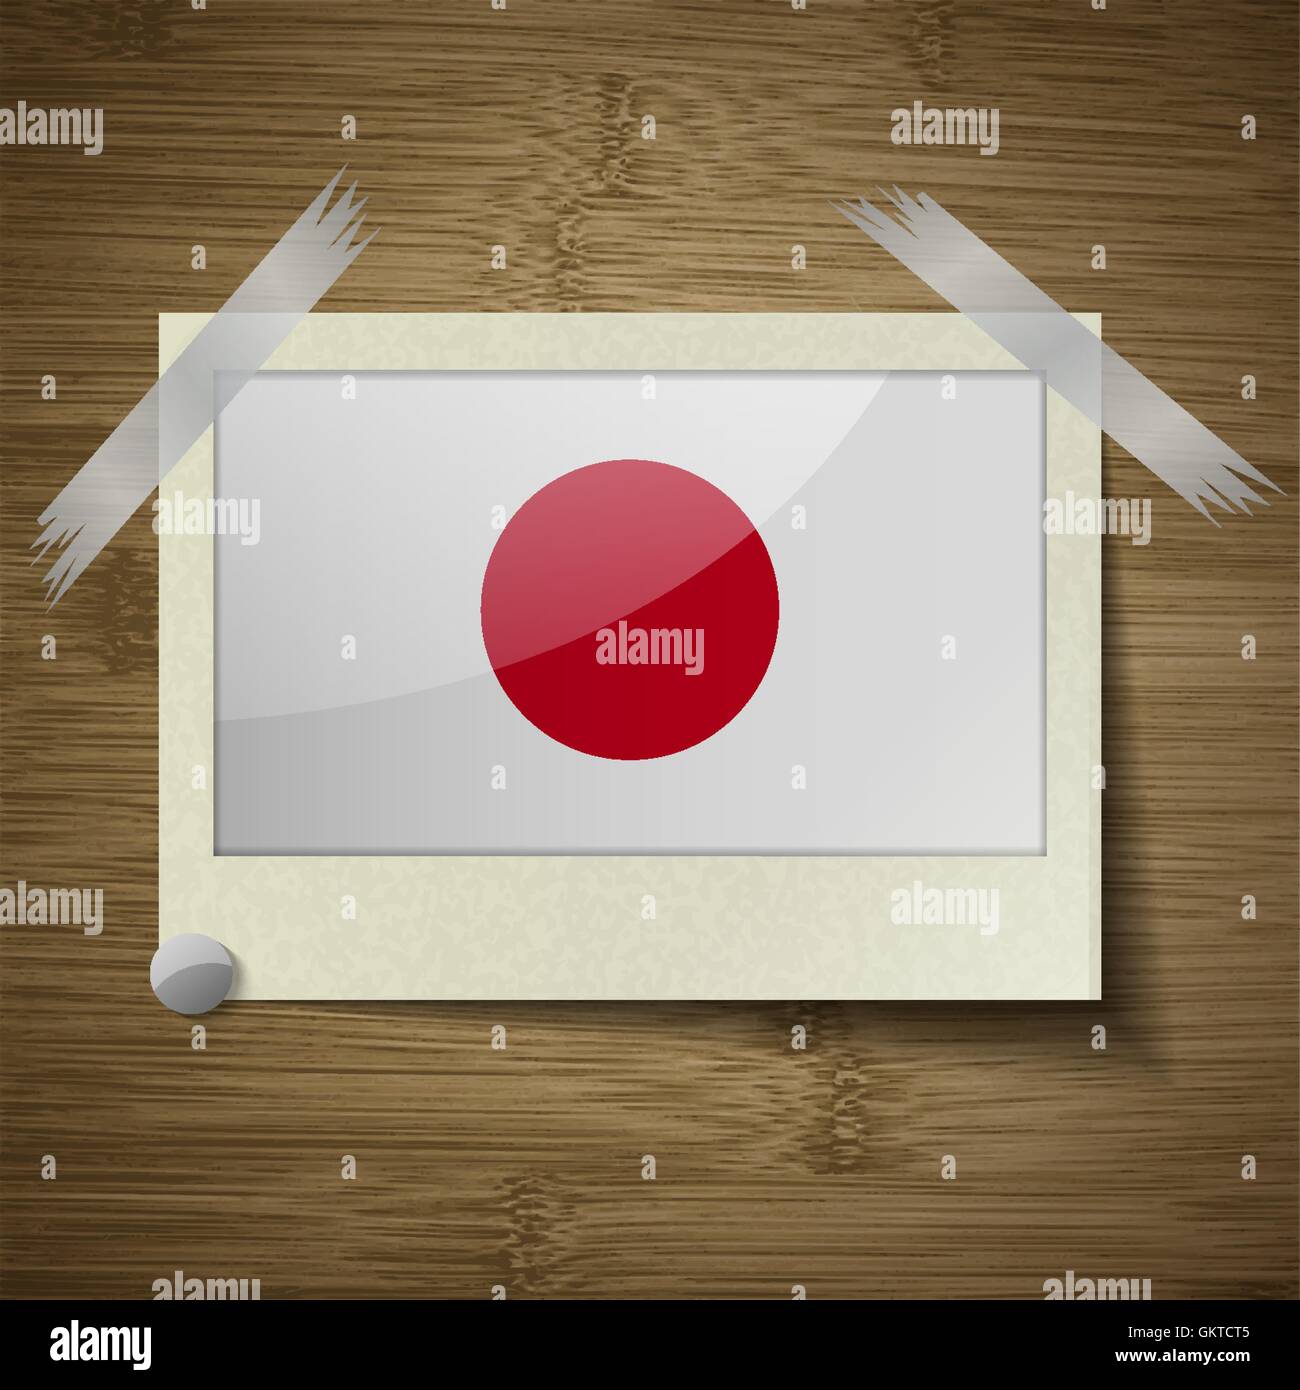 Flags Japan at frame on wooden texture. Vector Stock Vector